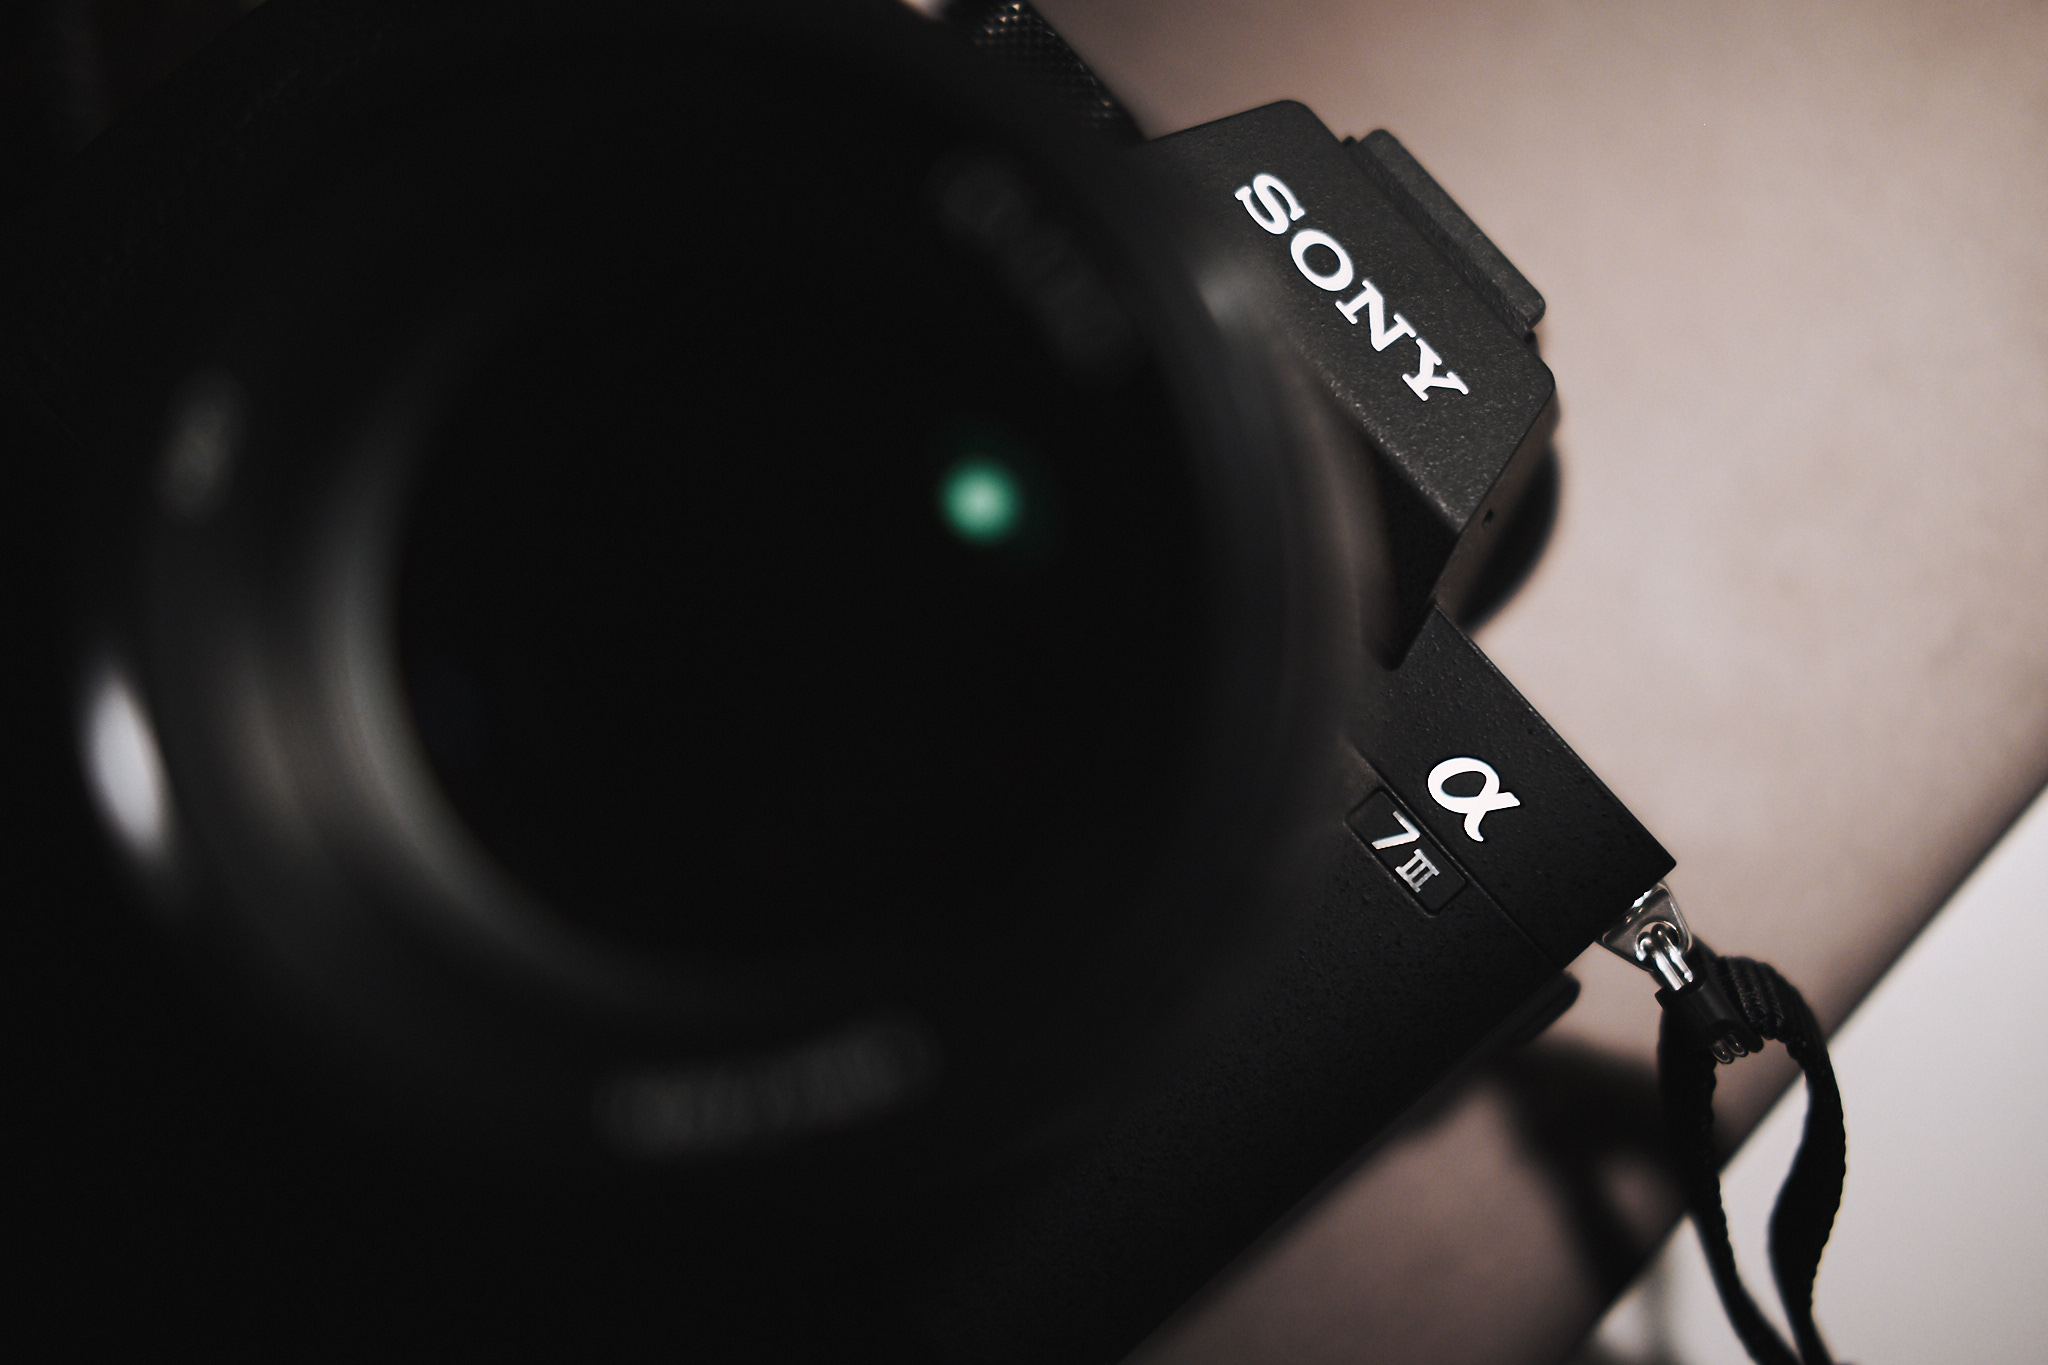 DxOmark Releases Sony A7III Test Results, Besting the Flagship A9